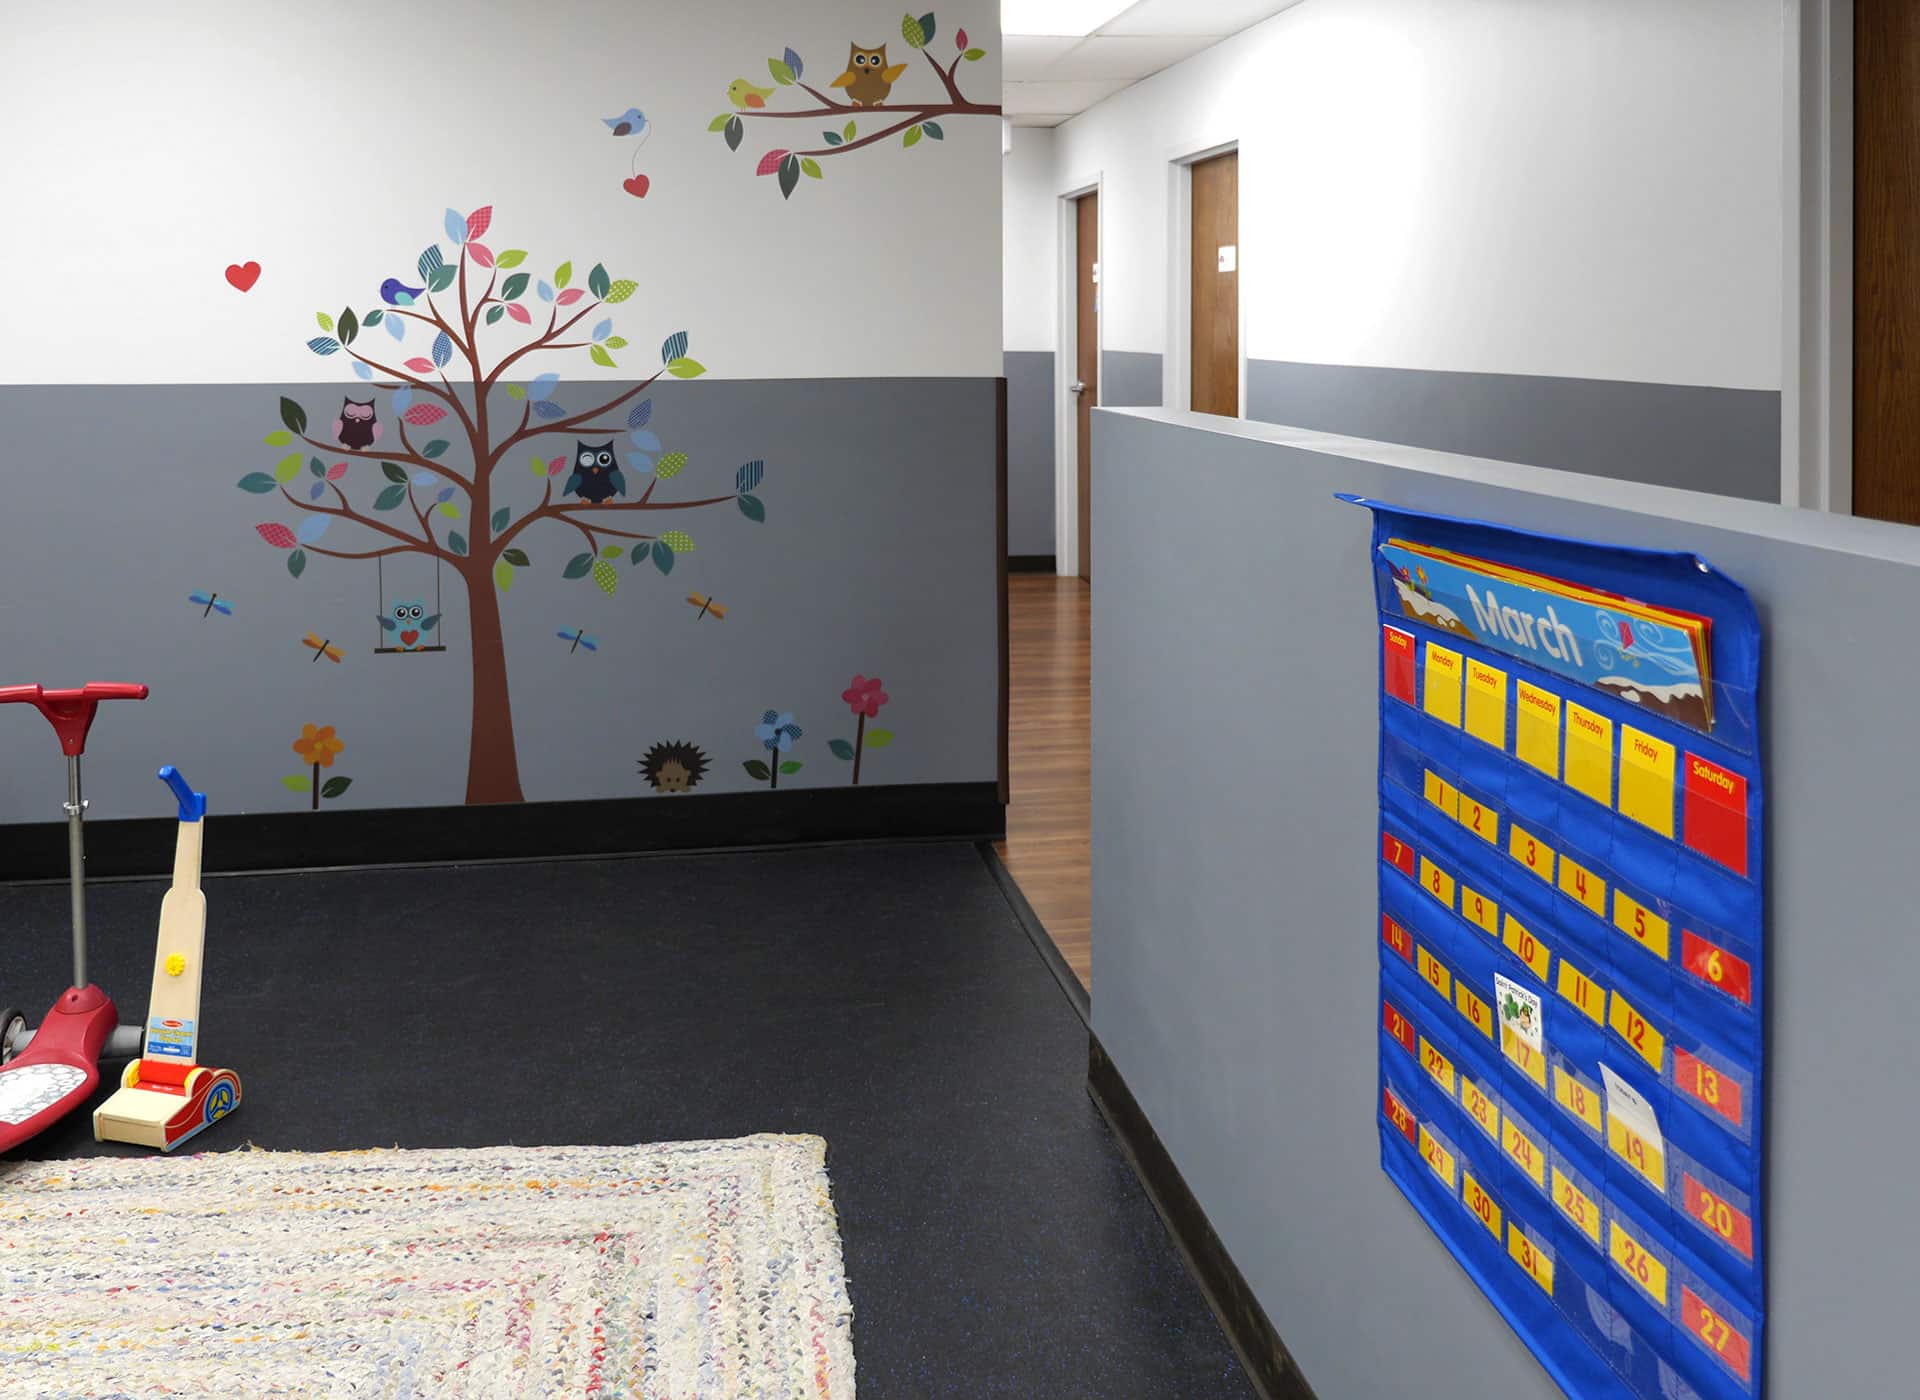 The play area at an autism center with a safety floor and a wall decal shaped like a tree.